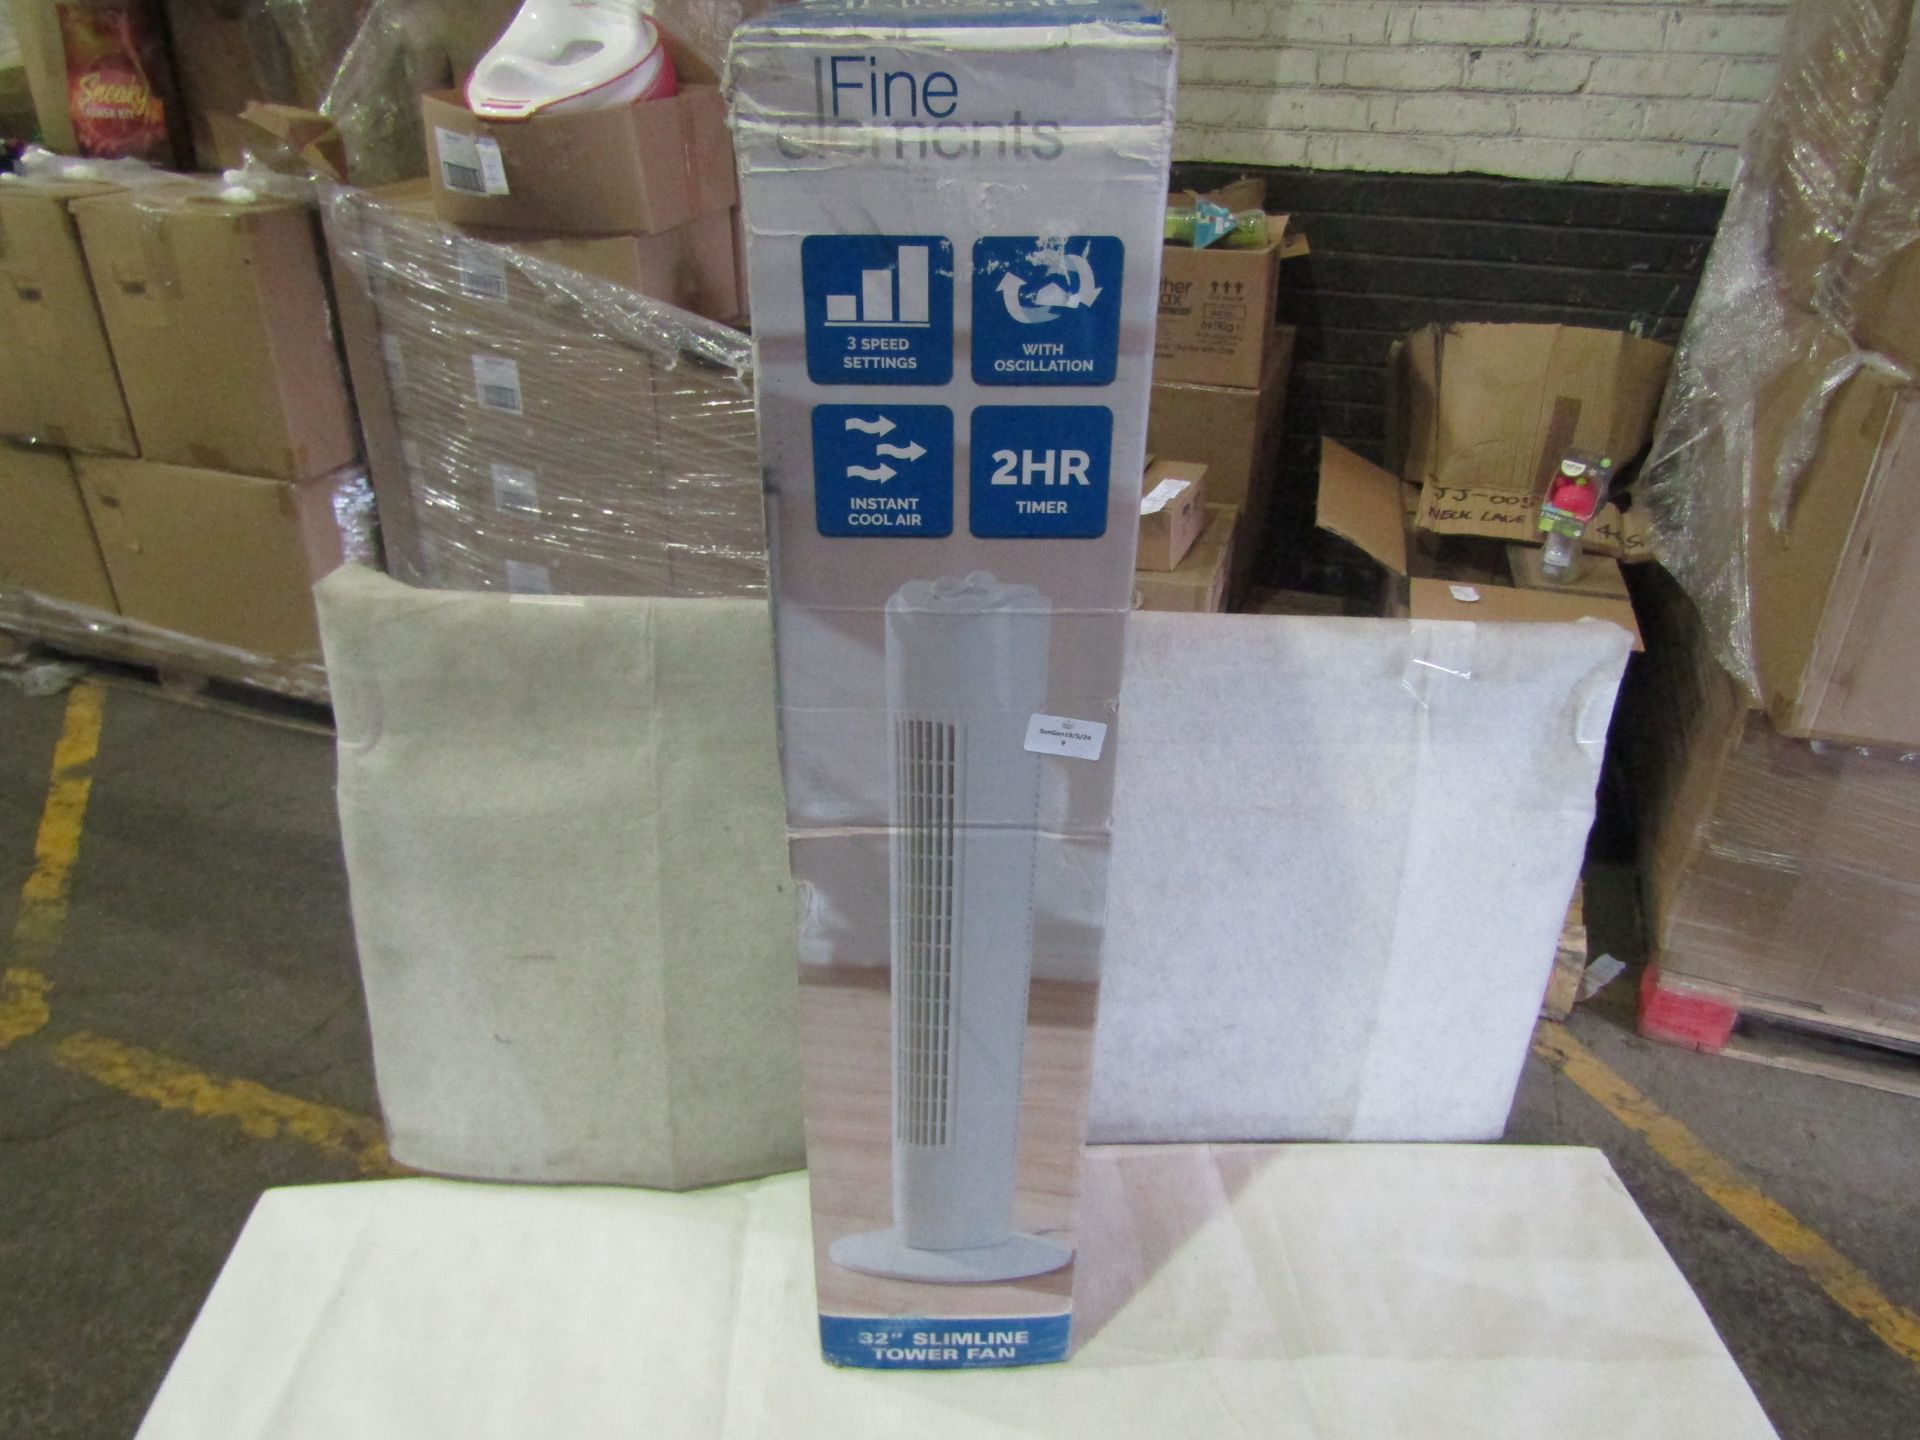 Fine Elements 32" Slimline Tower Fan, White - Unchecked & Boxed.